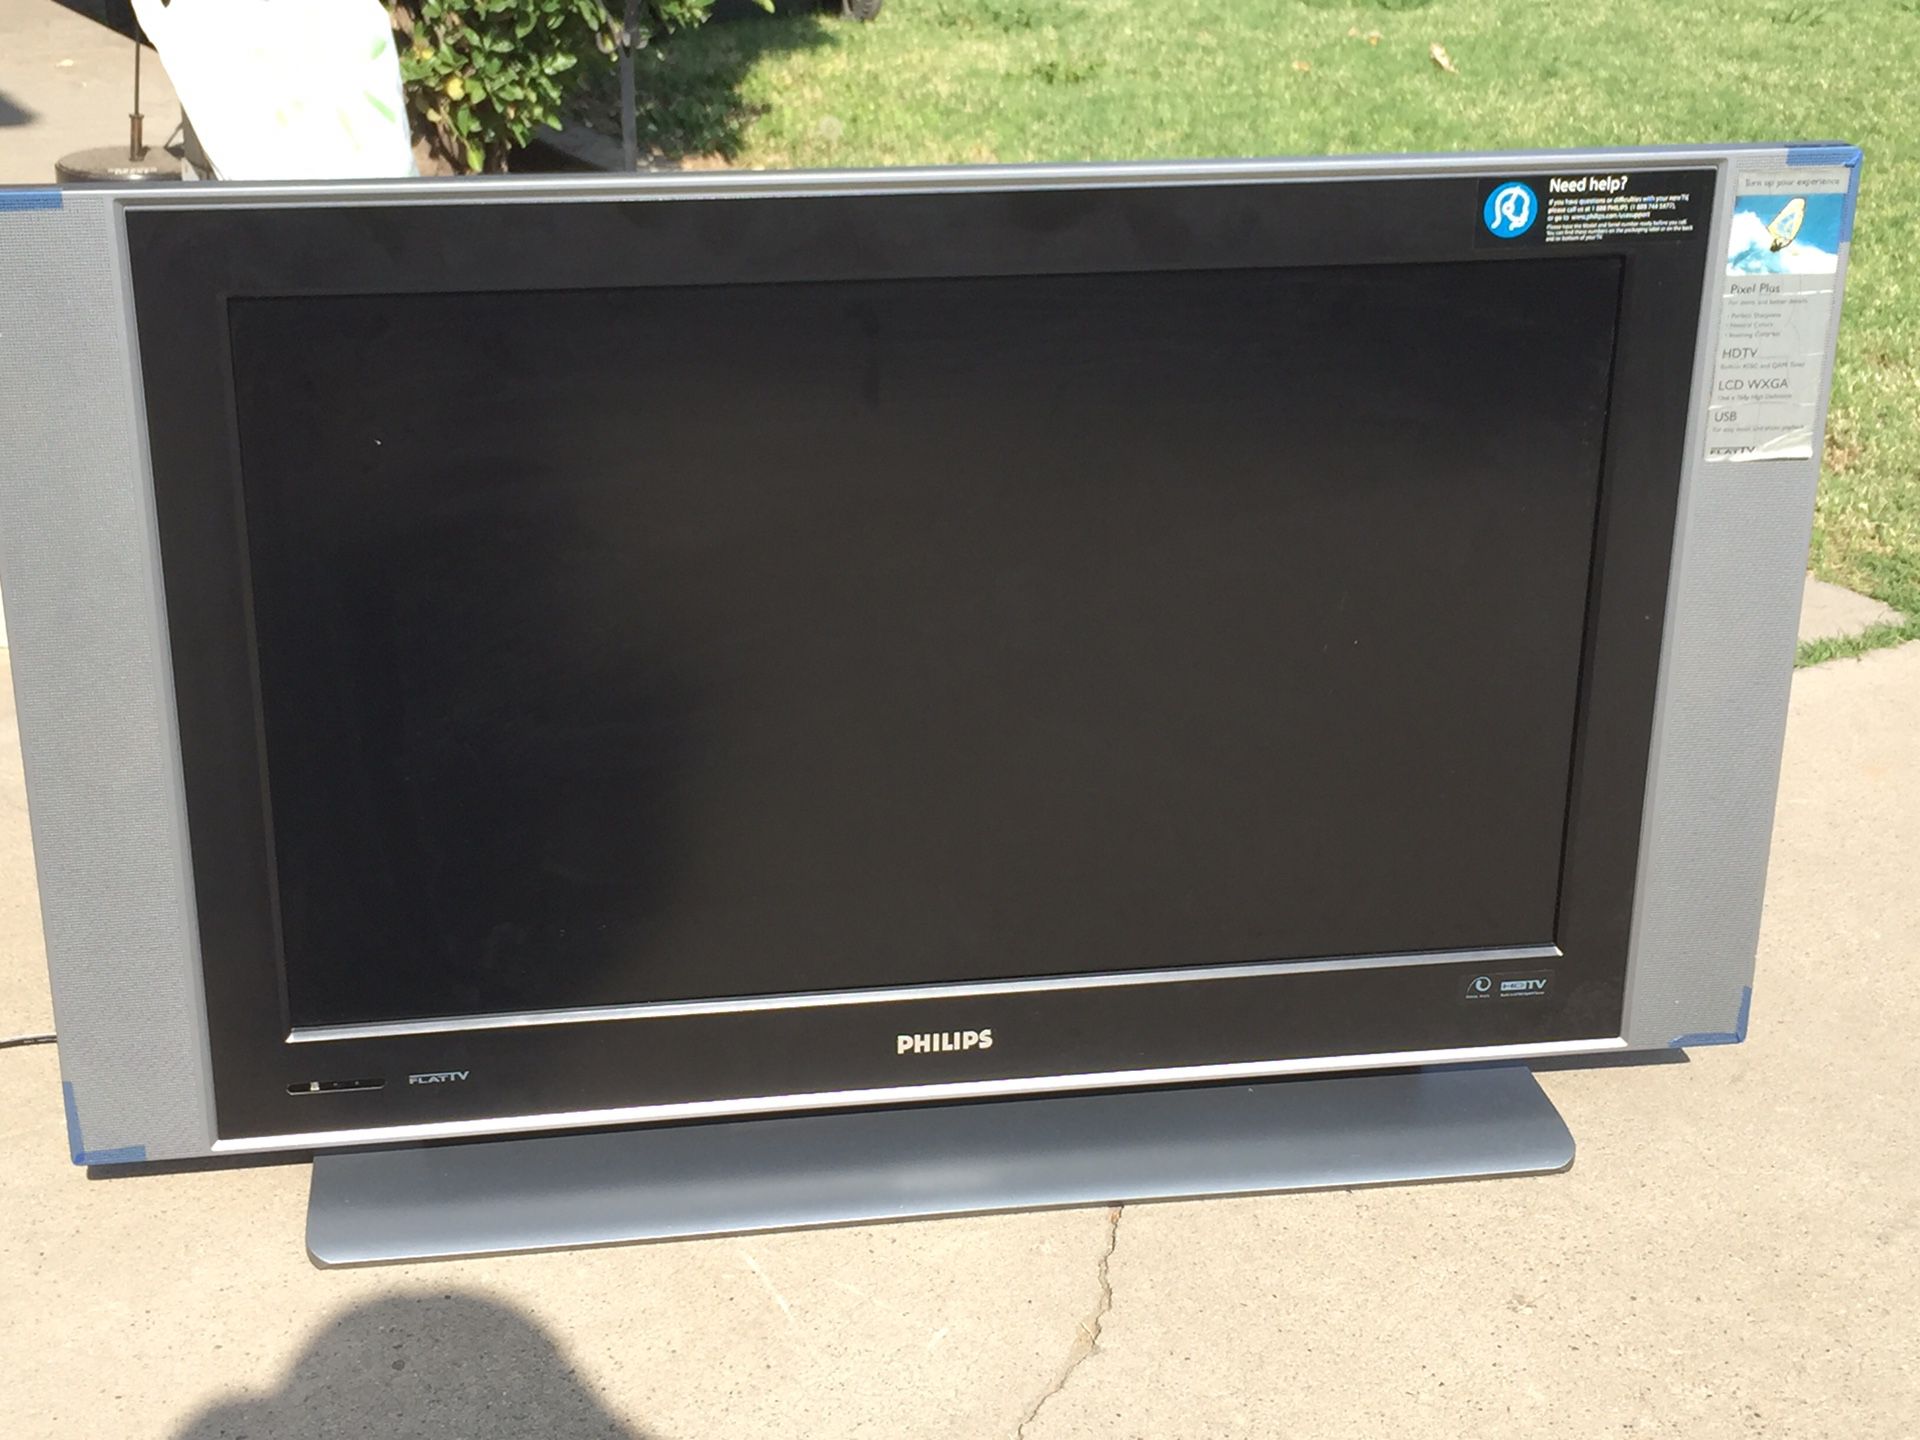 Philips 37Inch LCD TV. Condition is Used. Tv' work great, come with remote control